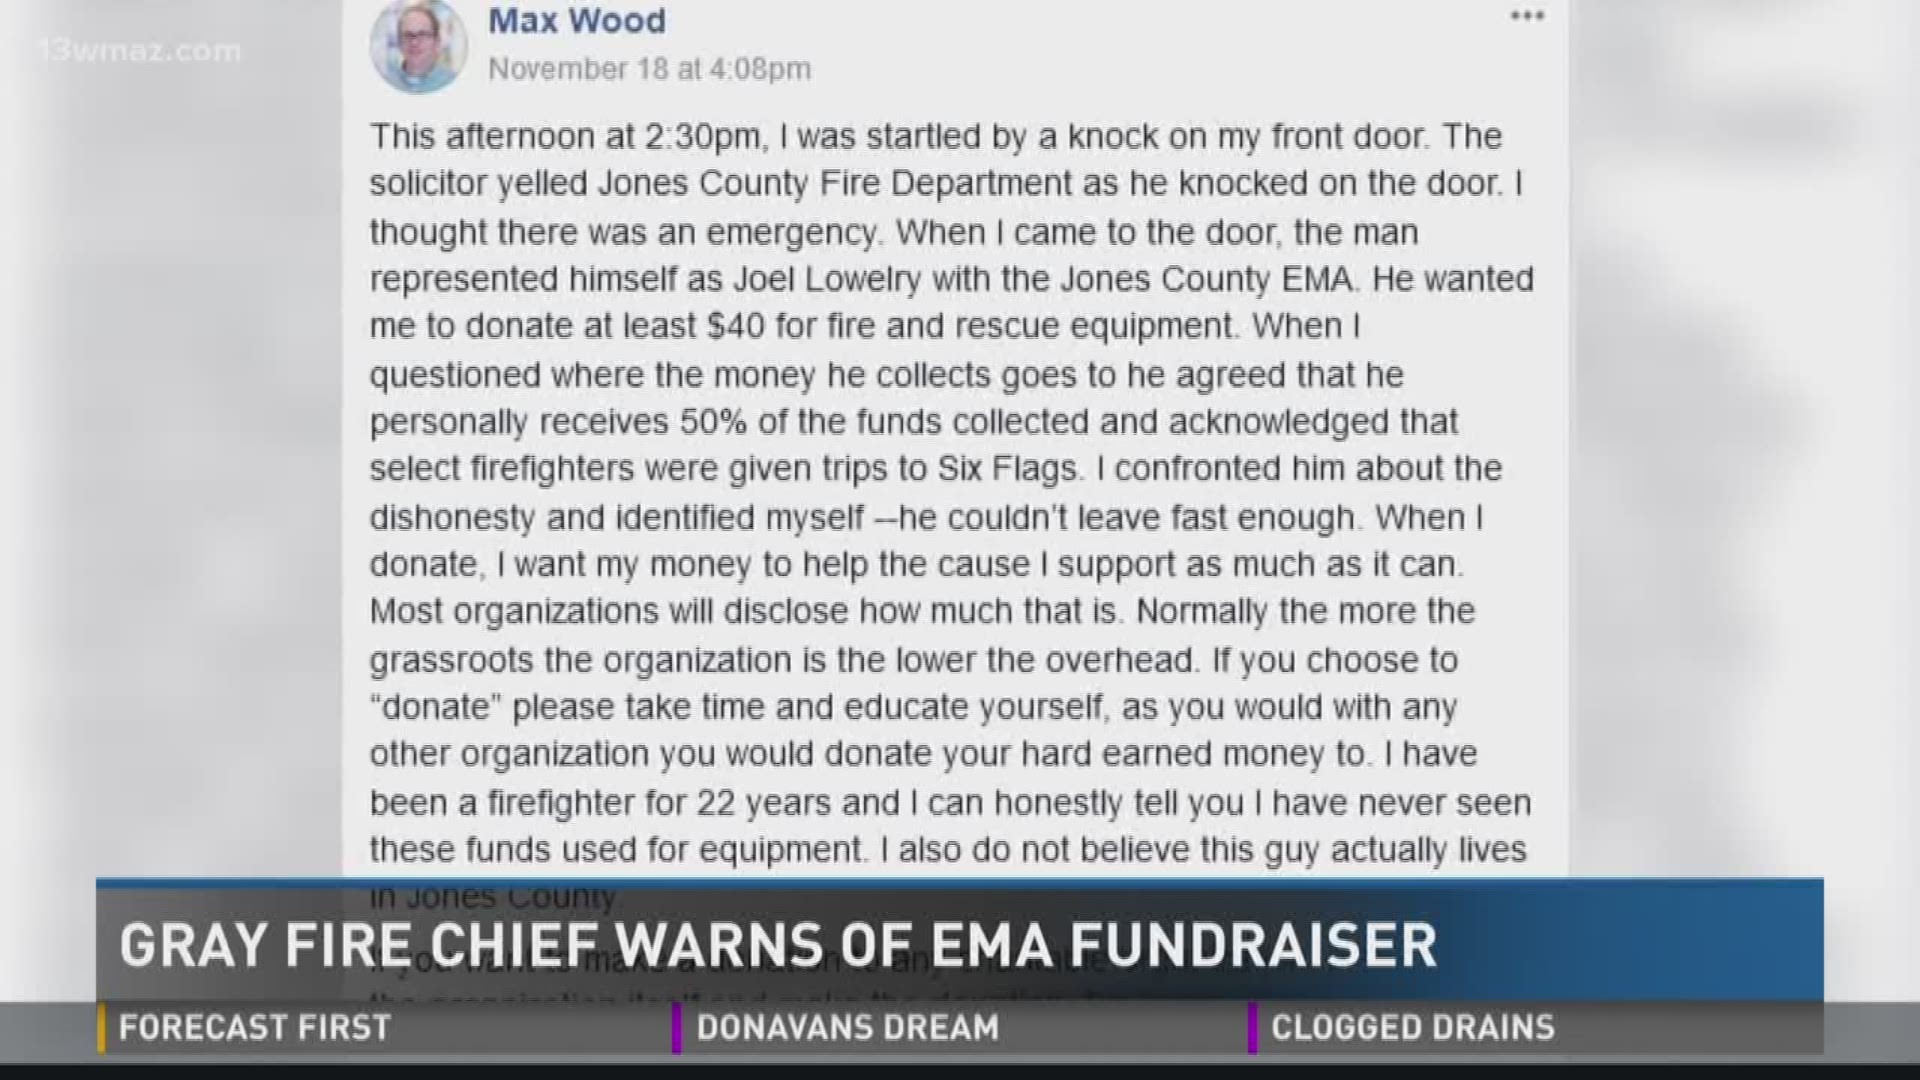 Gray fire chief warns of EMA fundraiser